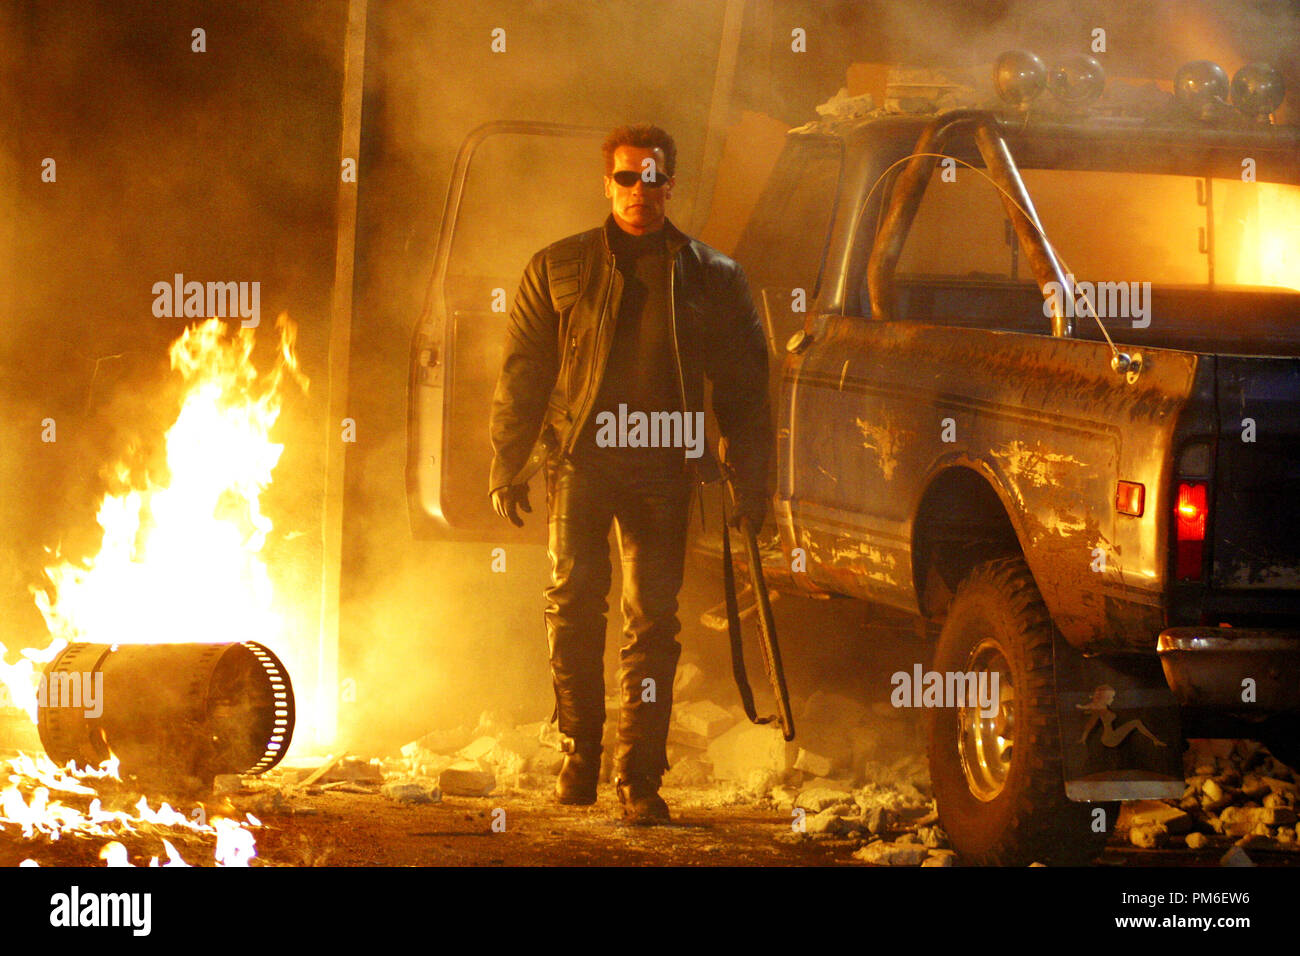 https://c8.alamy.com/comp/PM6EW6/film-still-publicity-still-from-terminator-3-rise-of-the-machines-arnold-schwarzenegger-2003-warner-photo-credit-robert-zuckerman-file-reference-30753391tha-for-editorial-use-only-all-rights-reserved-PM6EW6.jpg